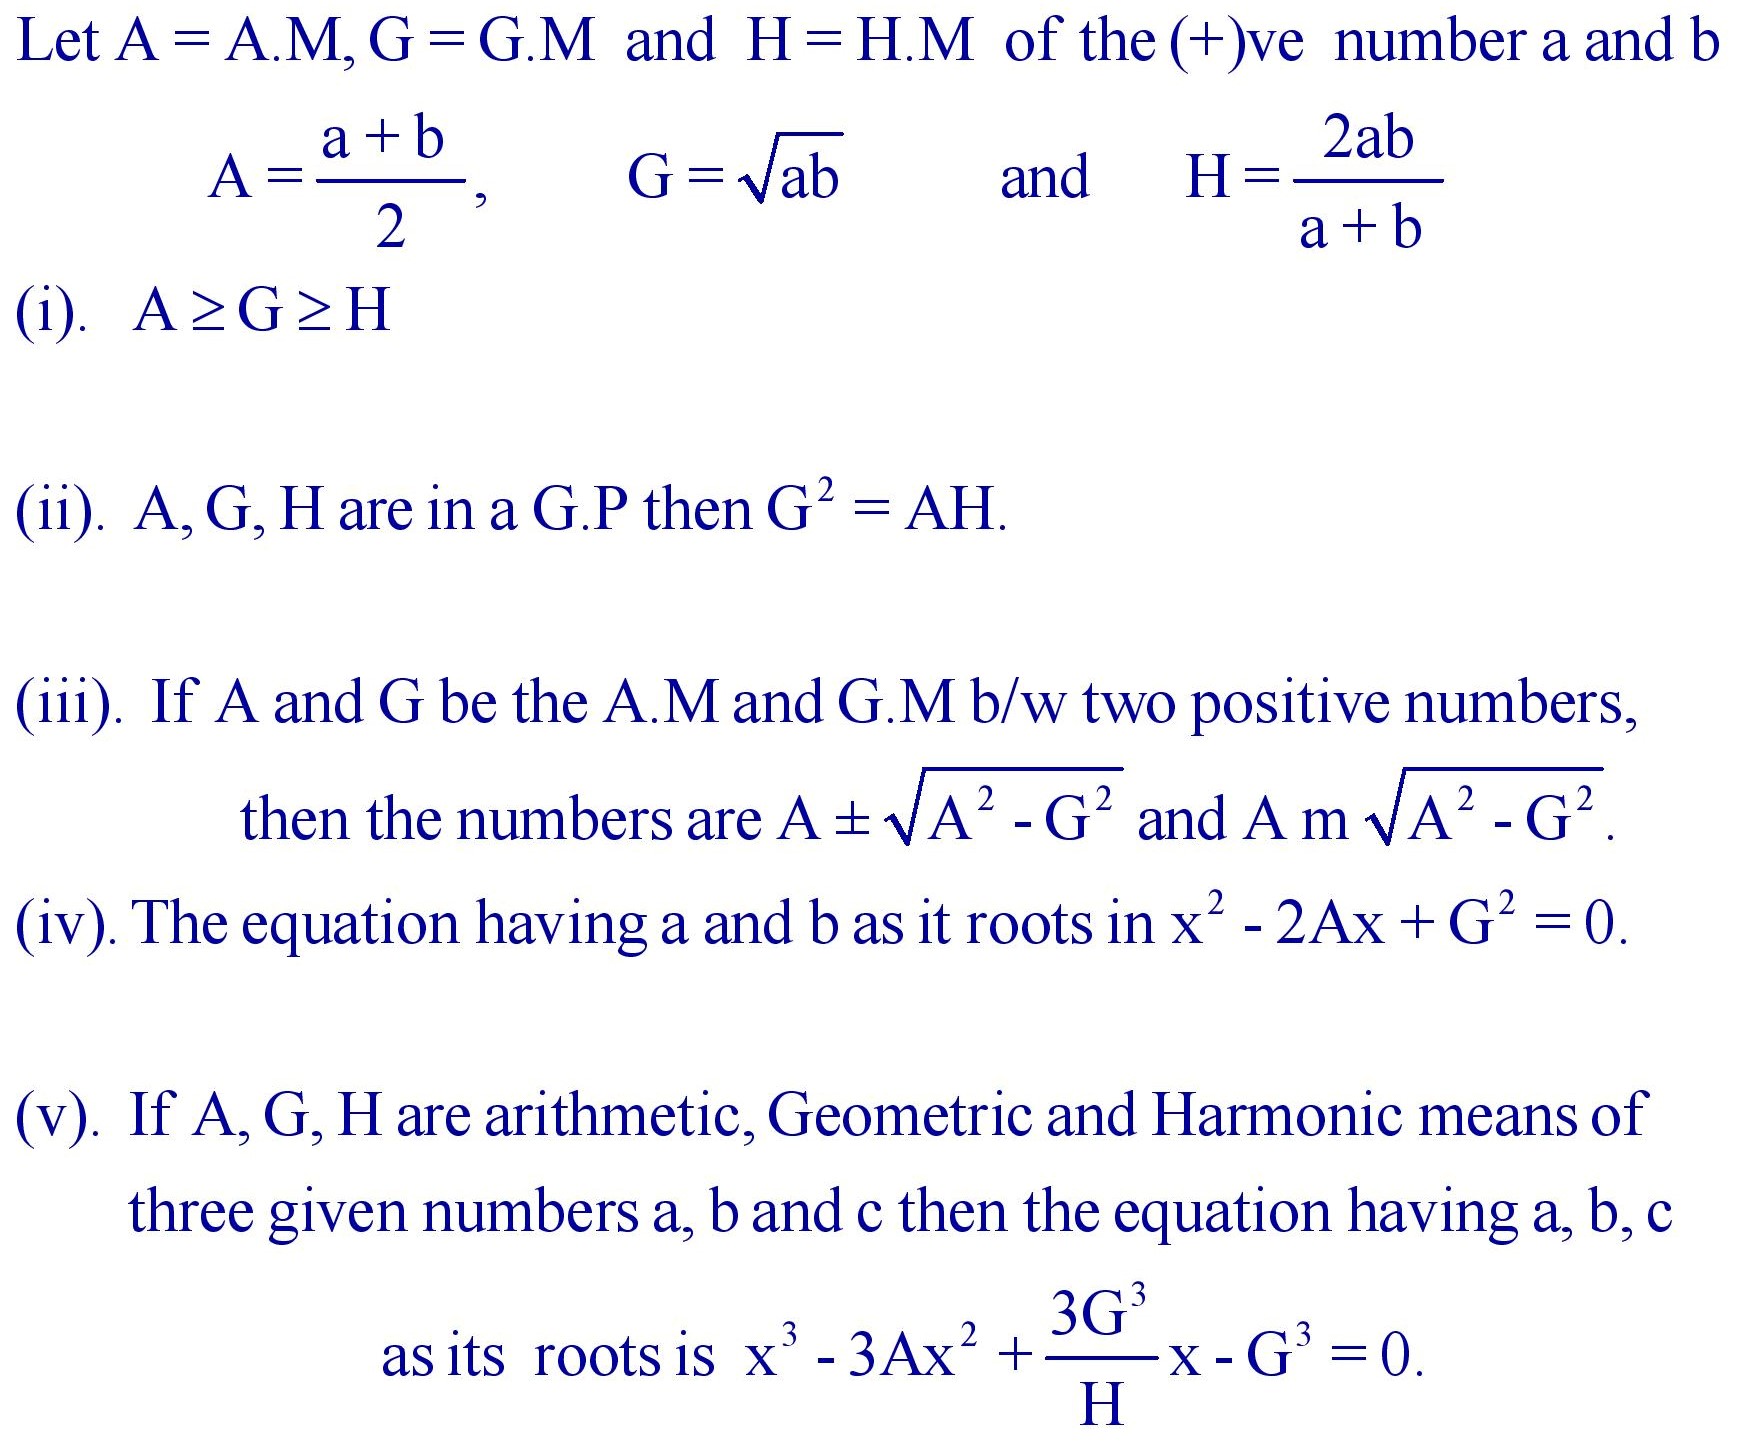 A.M , G.M and H.M of two positive real numbers